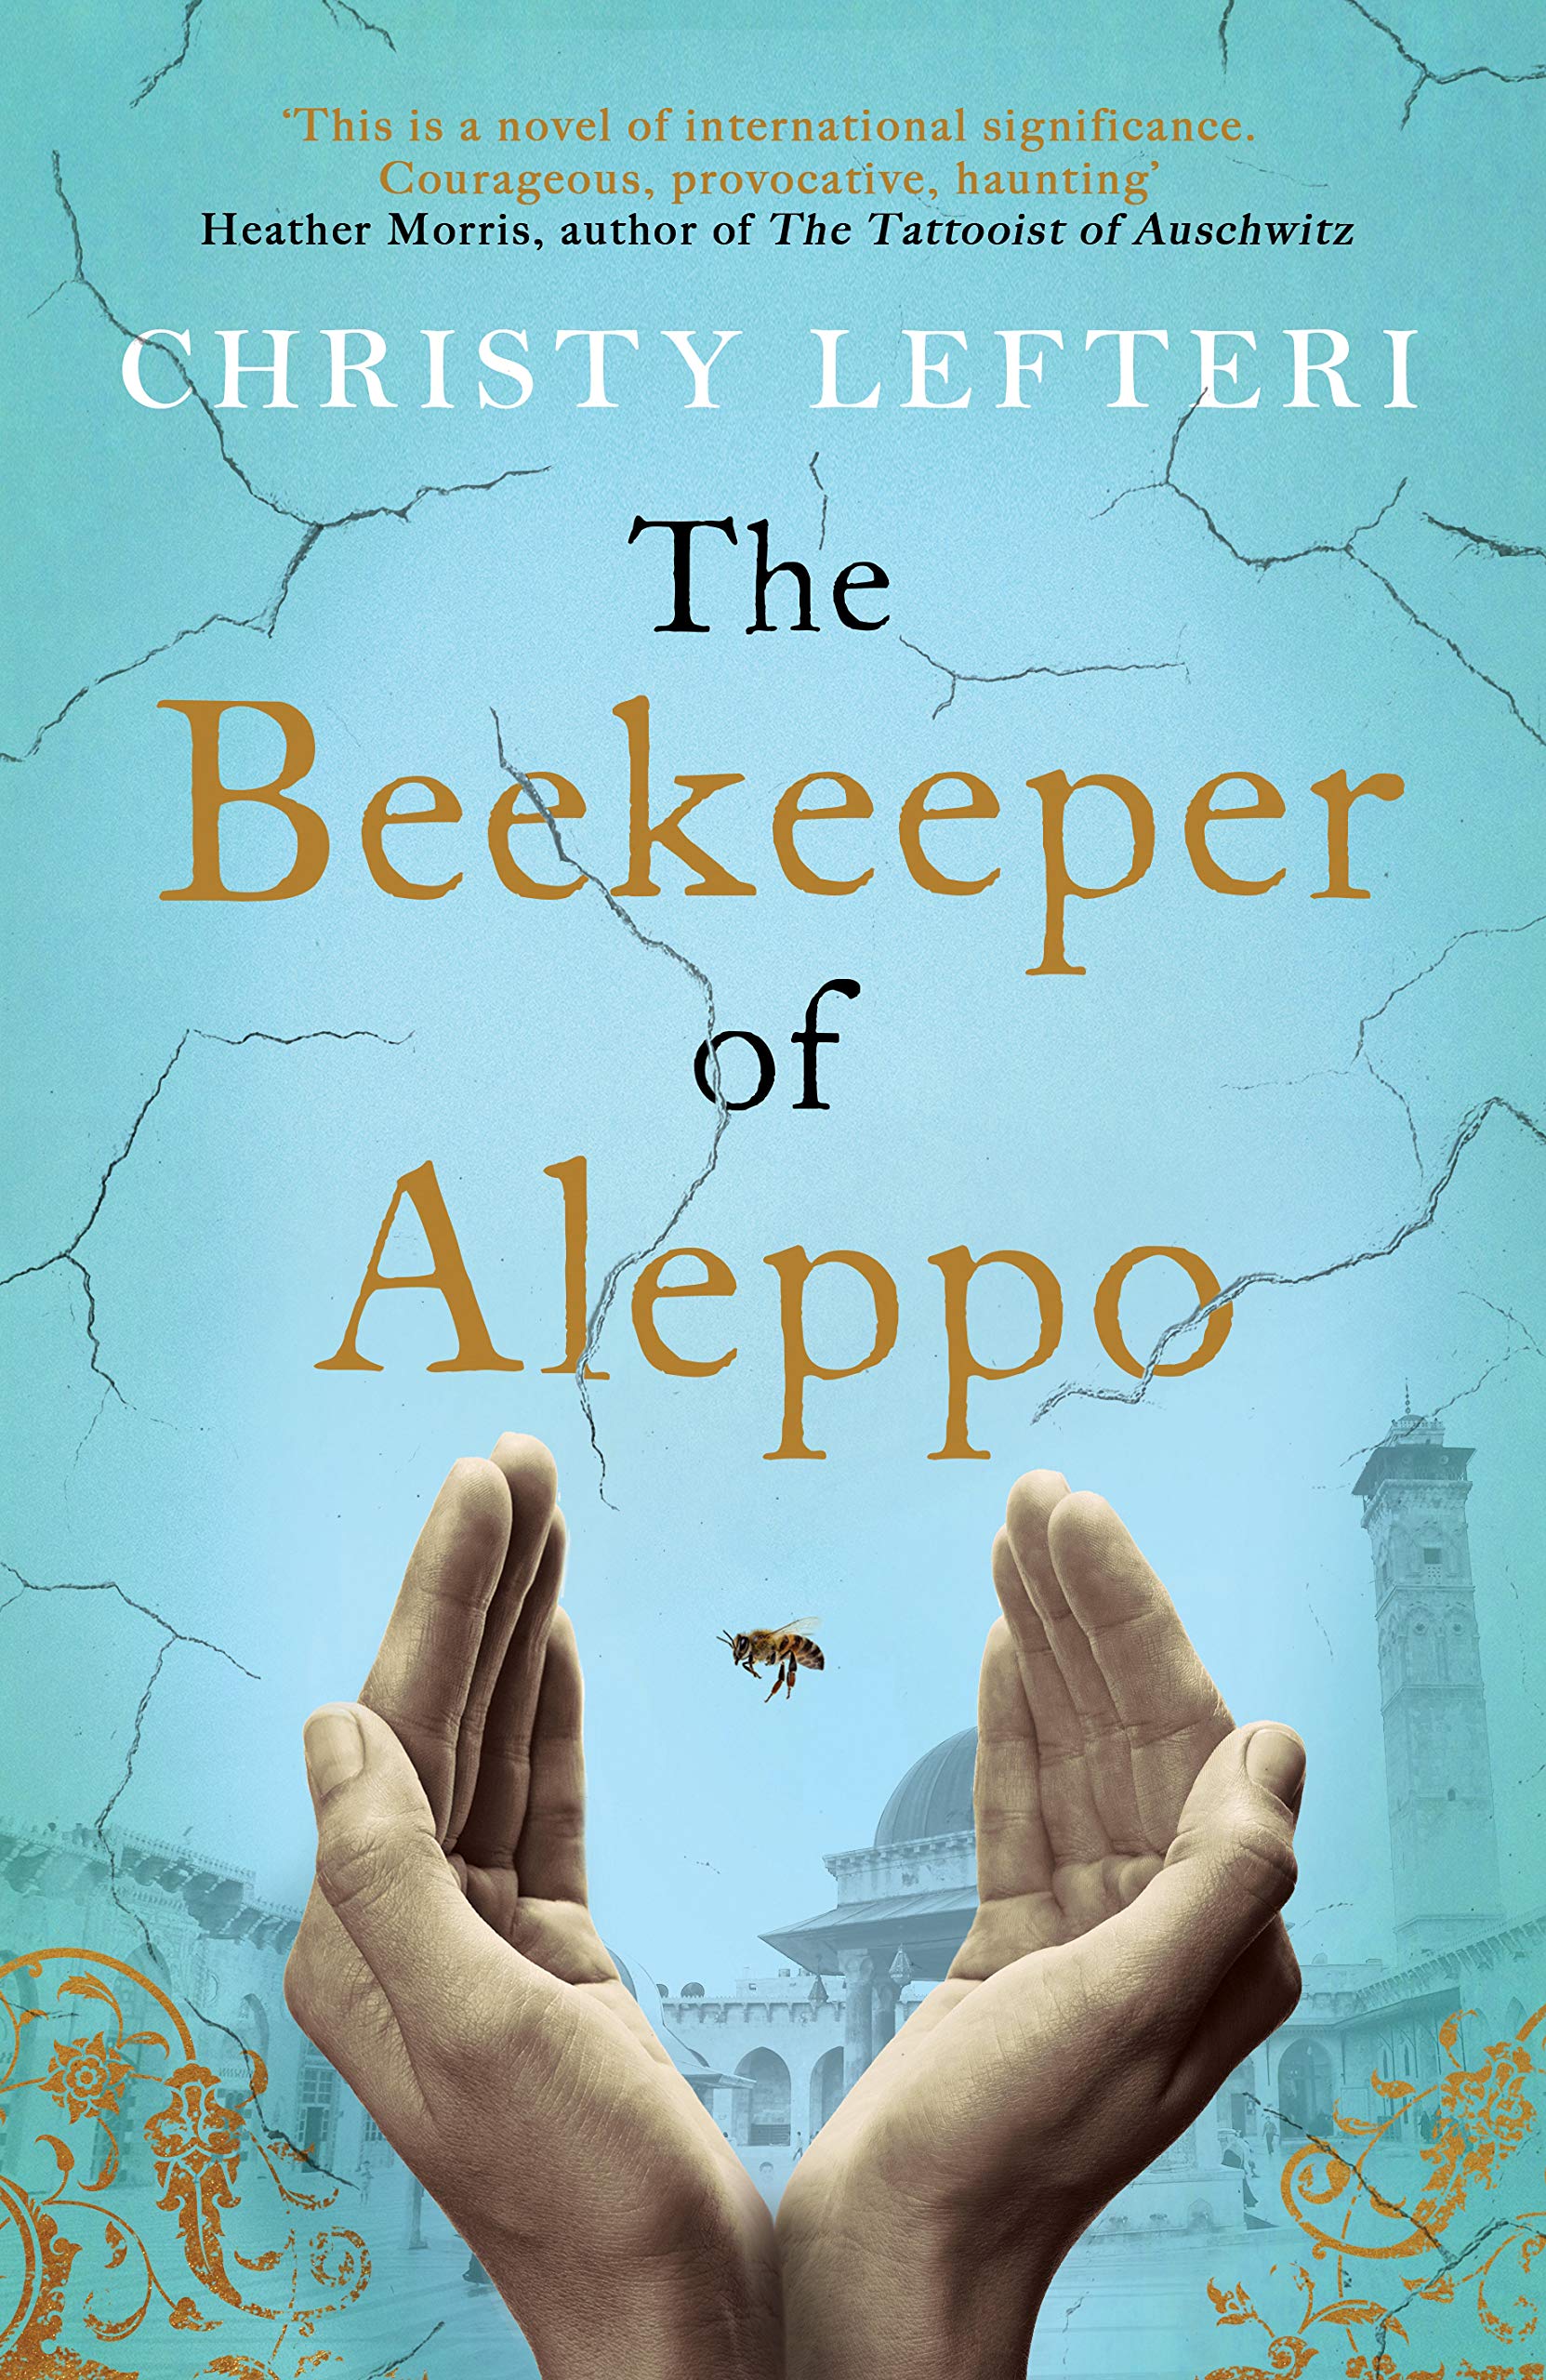 "The Beekeeper of Aleppo" by Christy Lefteri book cover